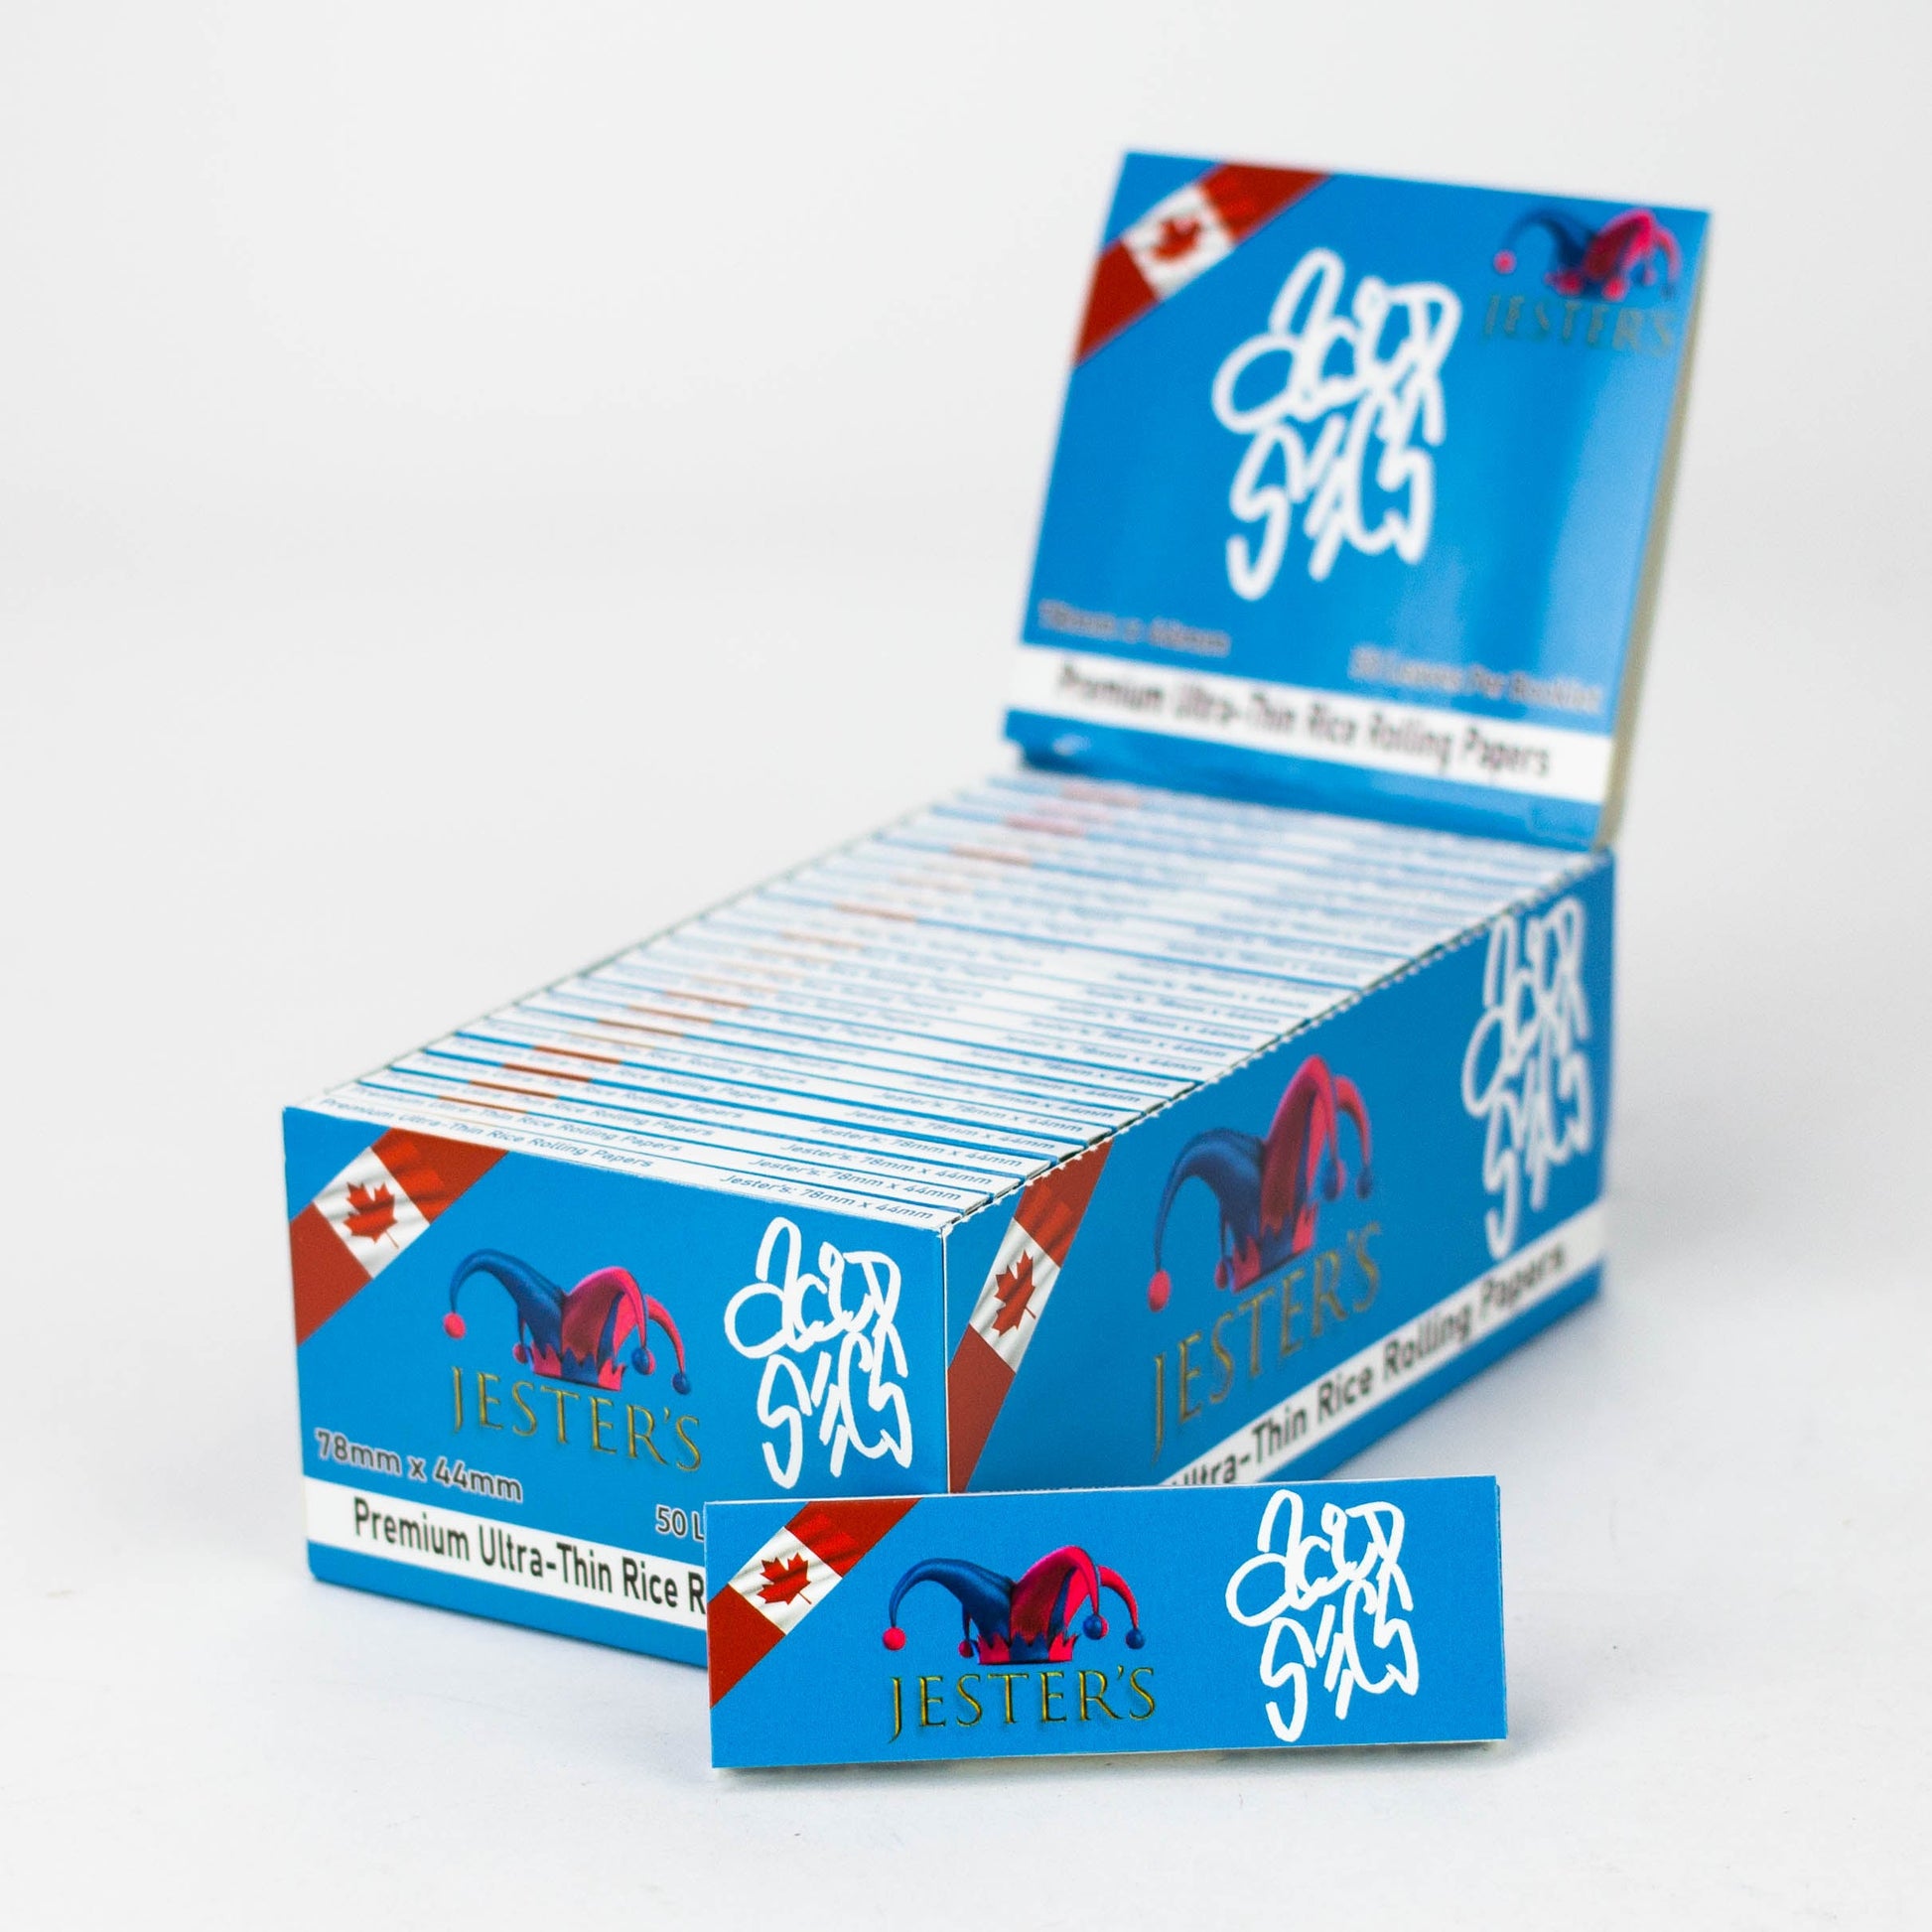 Acid Secs | Ultra thin rice Jester's Rolling Papers_0